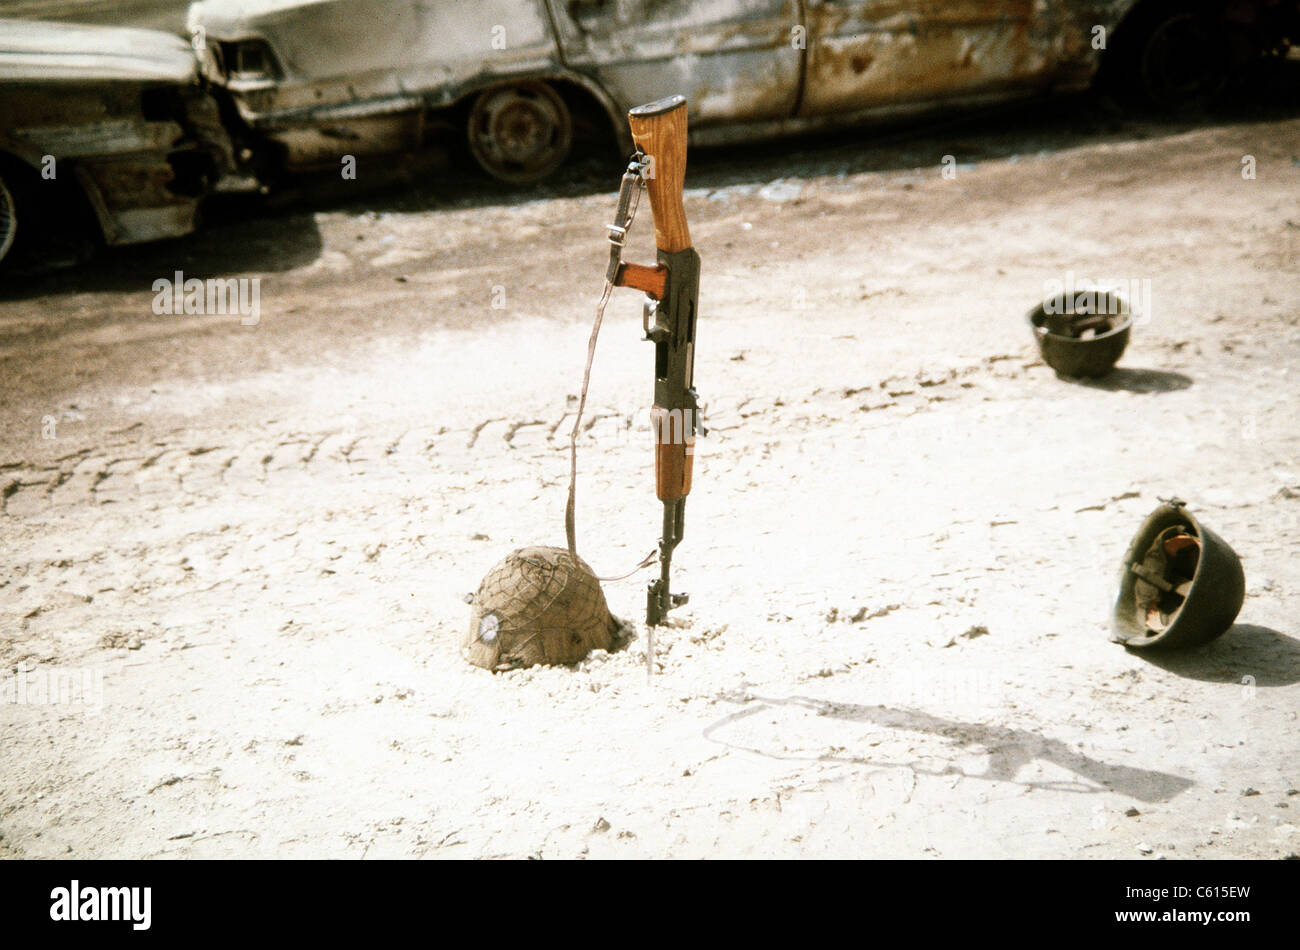 Discarded Iraqi helmets scattered around a Kalashnikov assault rifle near vehicles destroyed by Coalition forces during Operation Desert Storm. Mar. 1 1991 (BSLOC 2011 12 8) Stock Photo